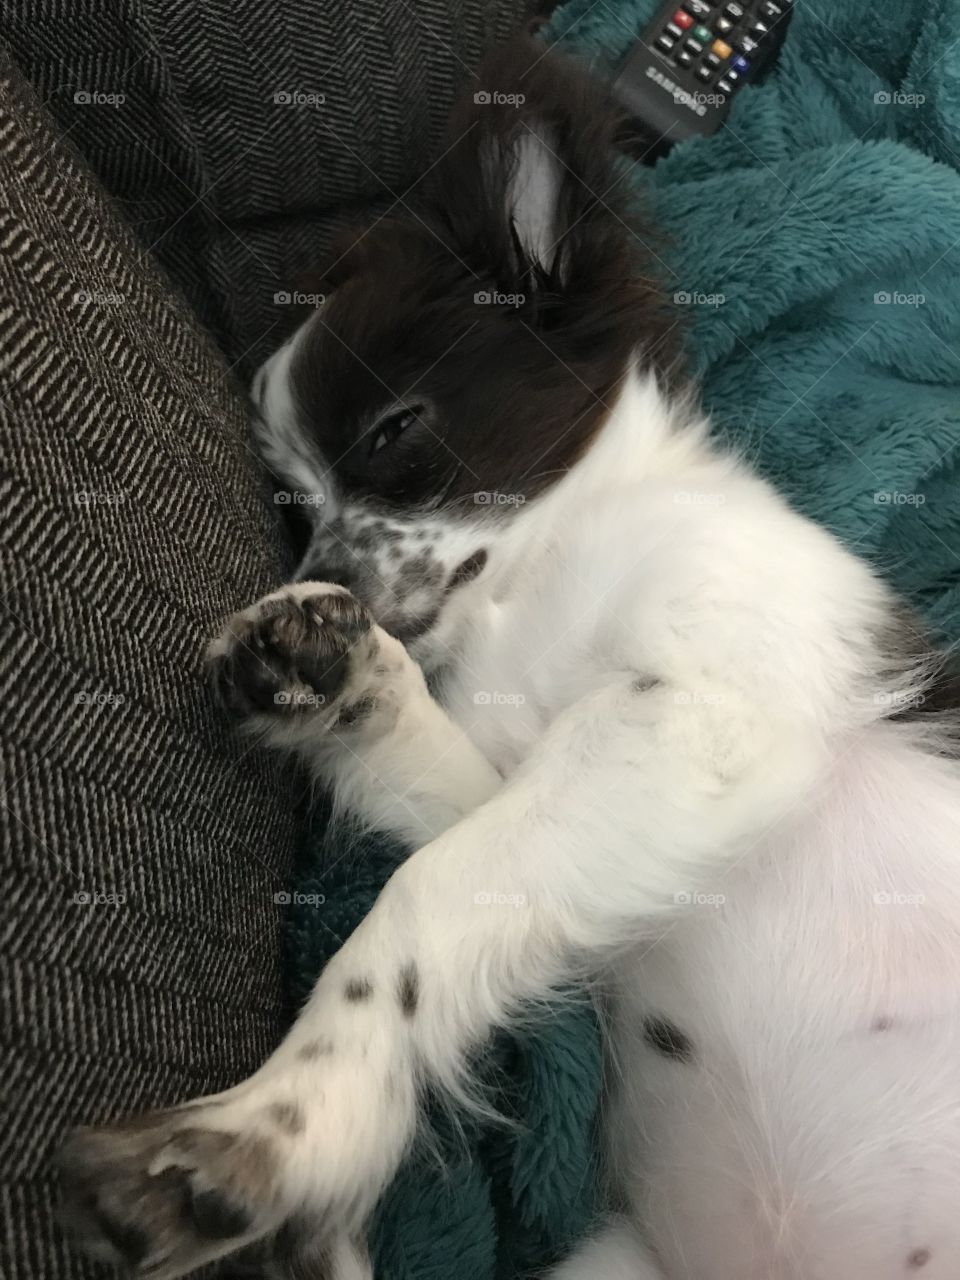 Sleepy Chihuahua Says No More Pictures Mom!